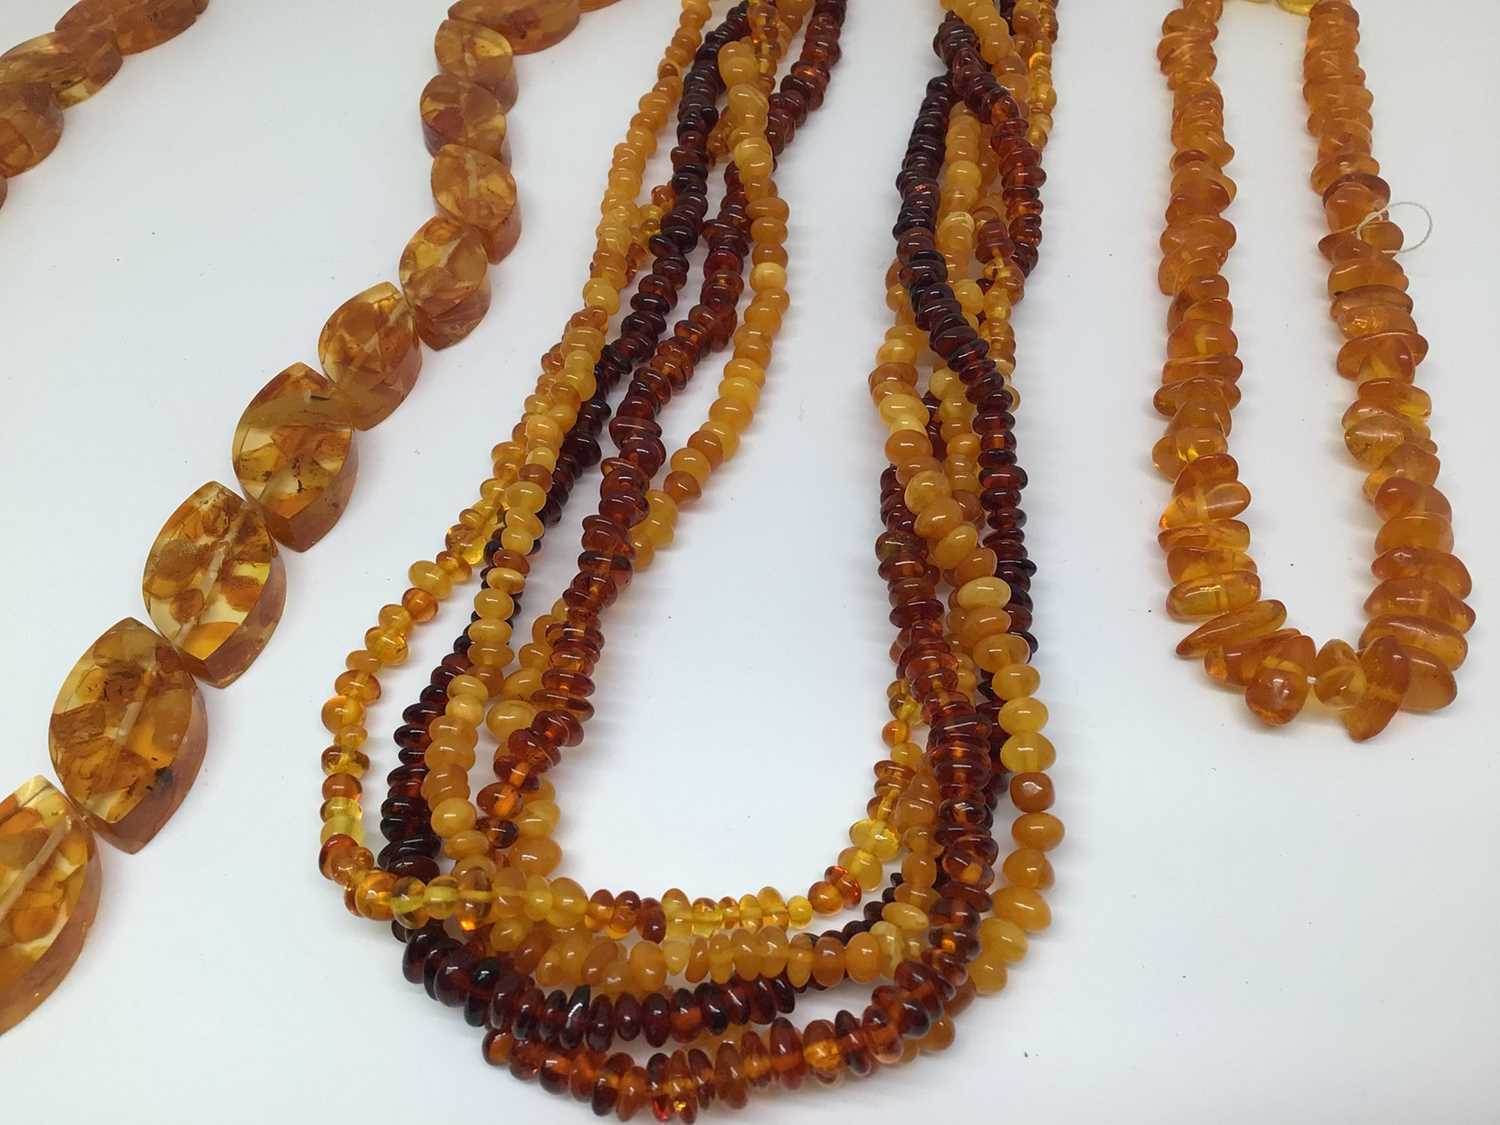 Amber bead torsade necklace with silver clasp, 48.5cm long and two other reconstituted amber bead ne - Image 2 of 2